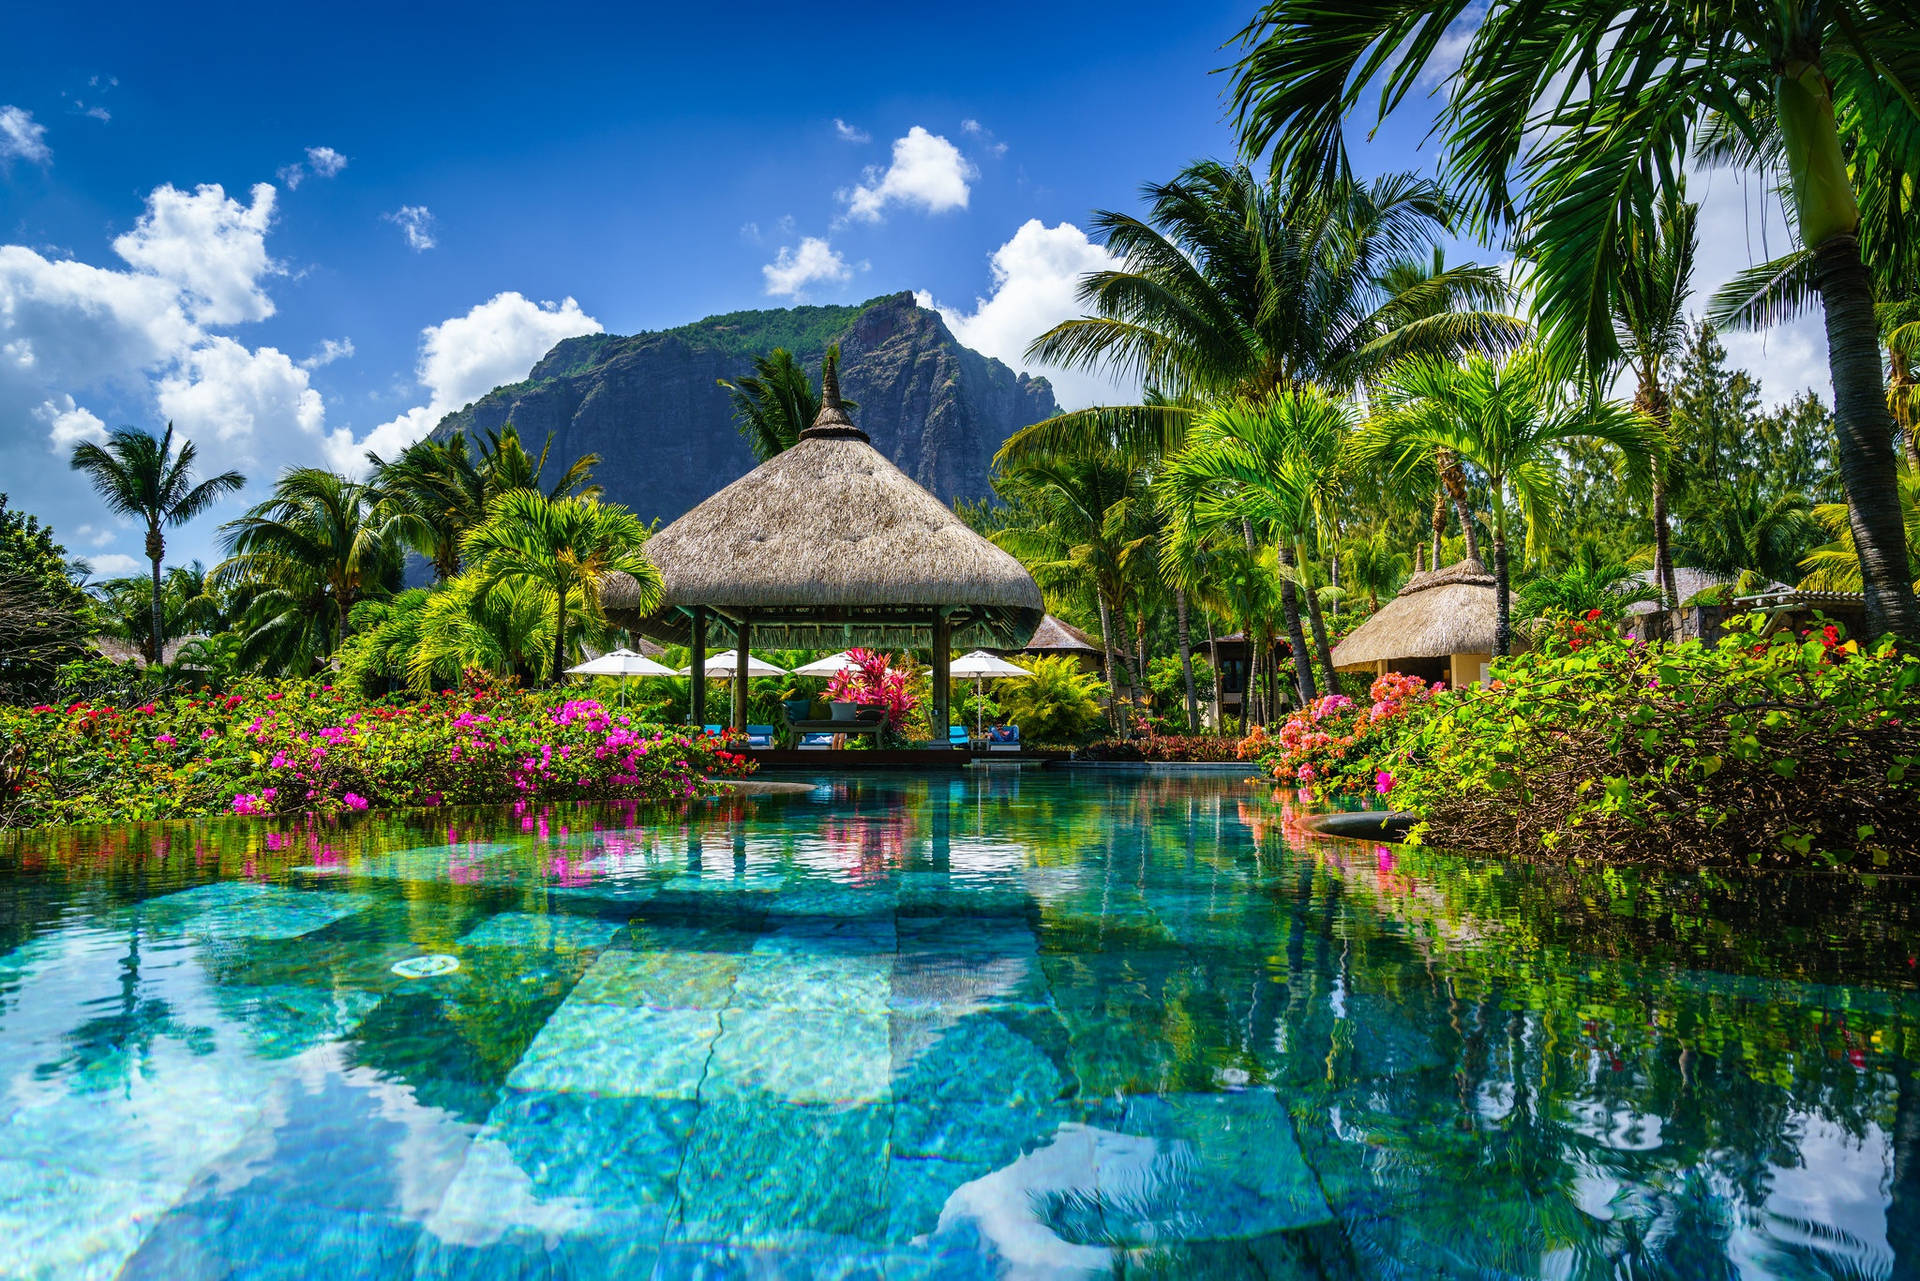 Pool In Mauritius Background